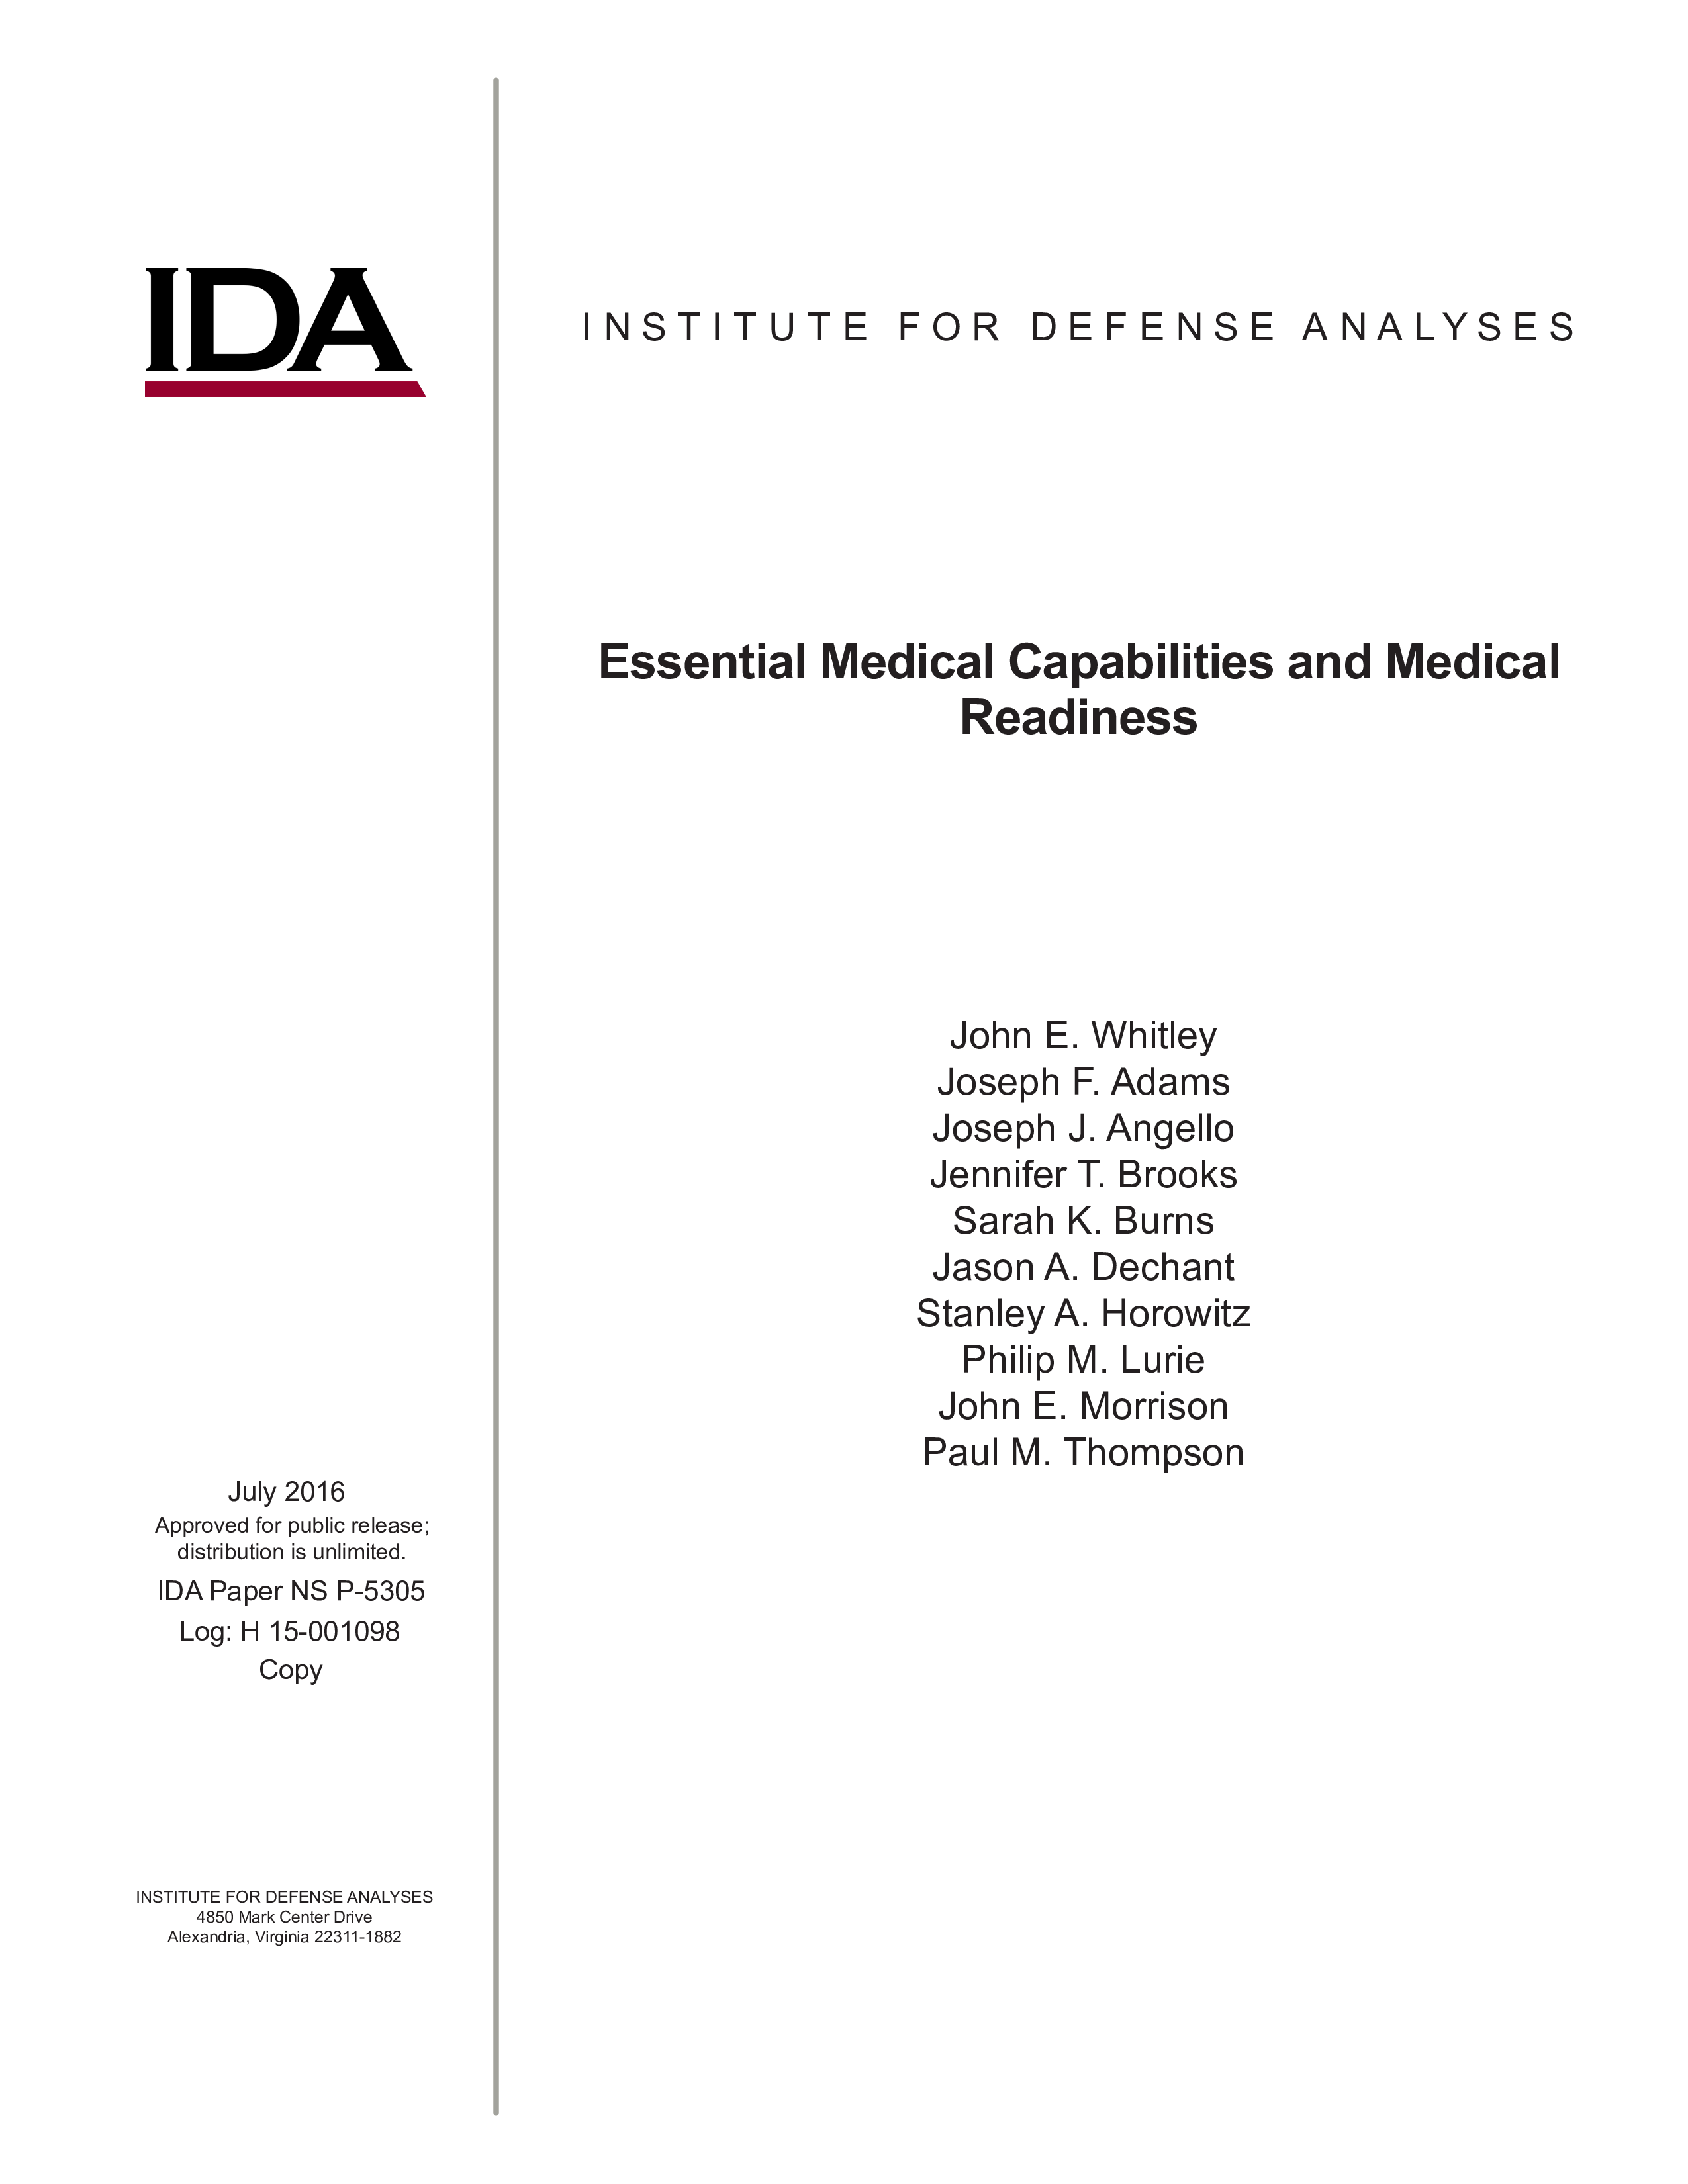 Essential Medical Capabilities and Medical Readiness